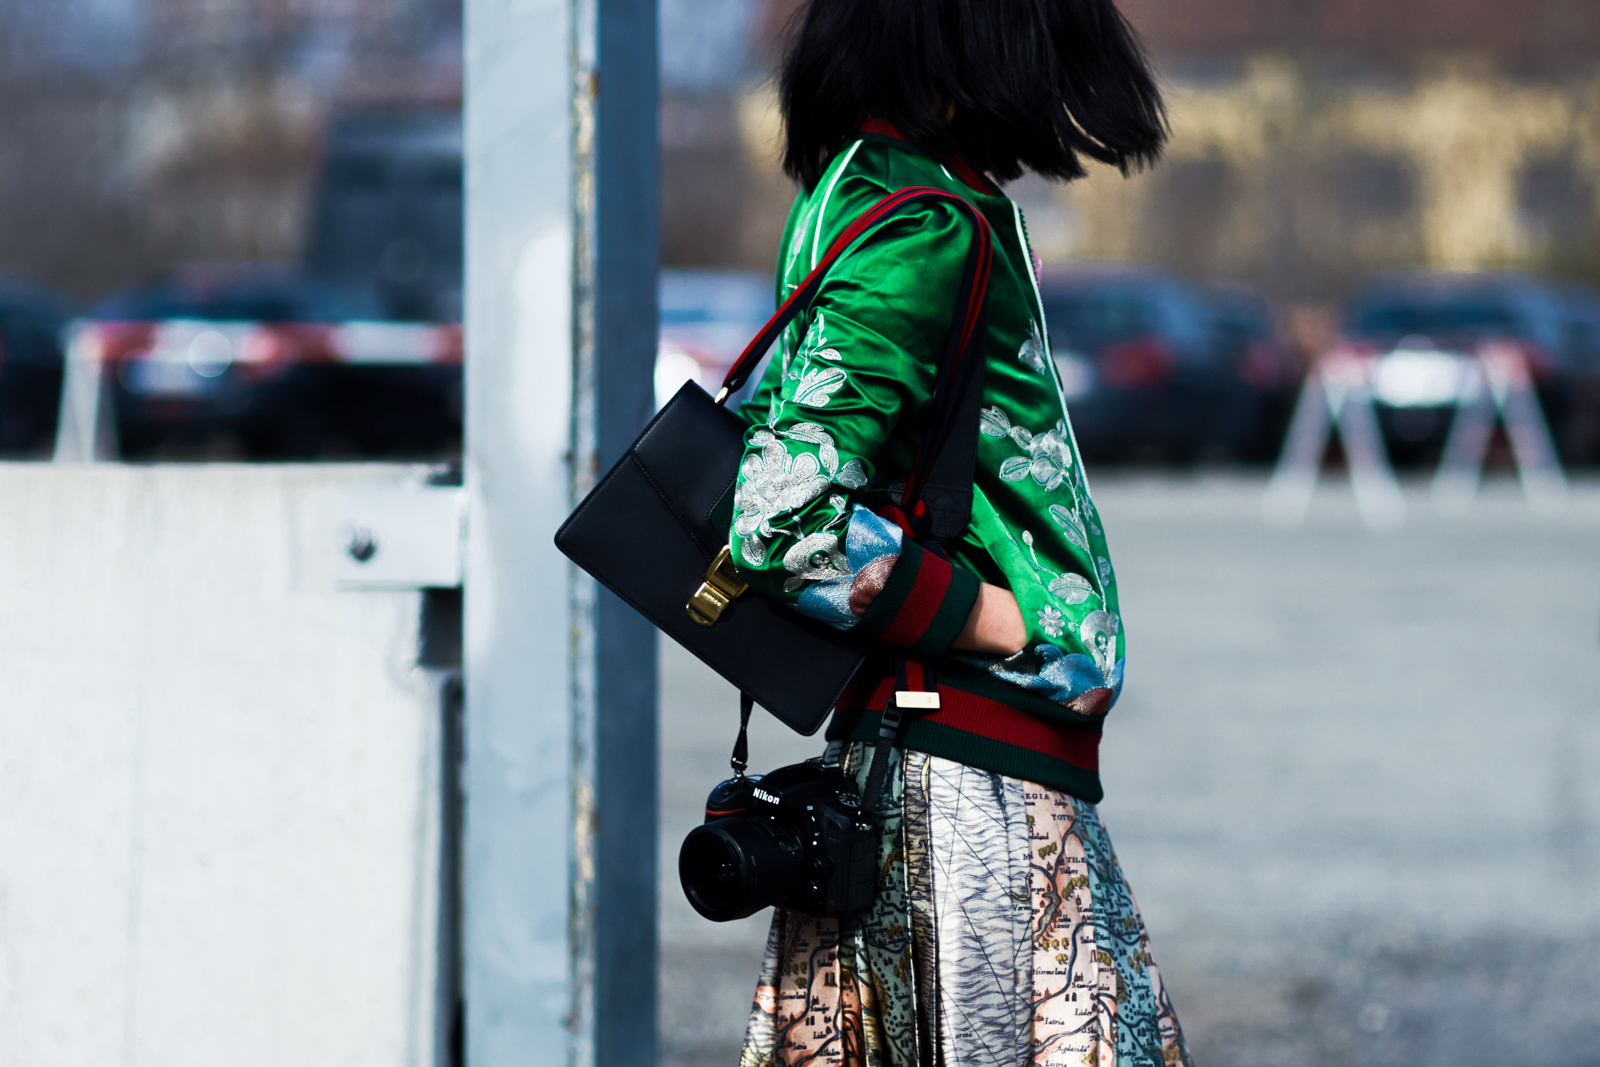 MFW Street Style: Blogger Margaret Zhang wearing a Gucci bomber jacket, Gucci skirt ang bag before the Gucci Fall/Winter 2016-17 fashion show in Milan